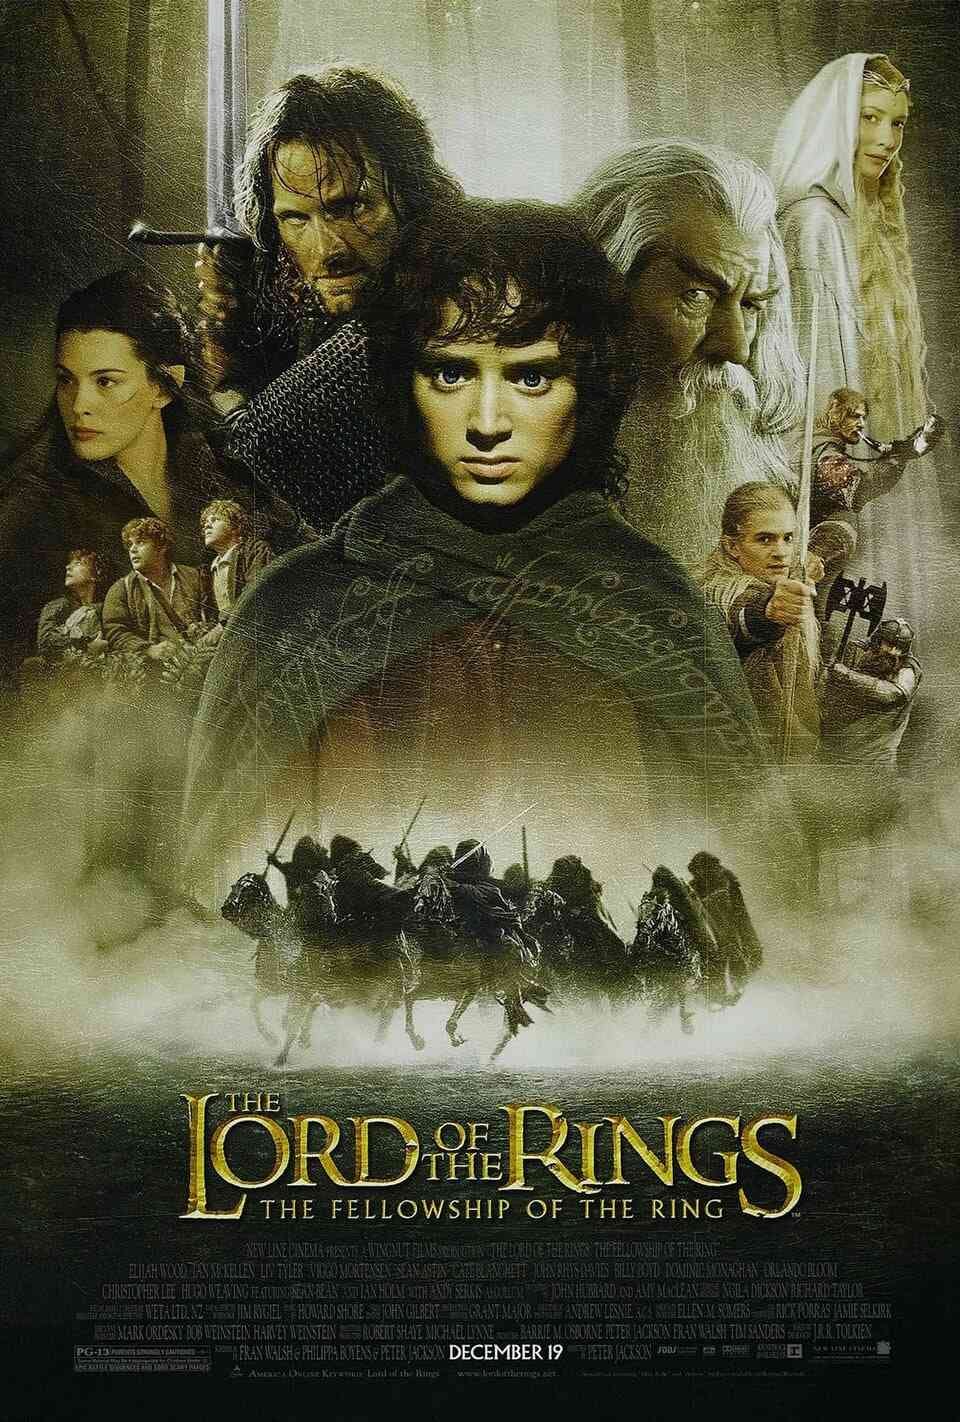 Read The Fellowship of the Ring screenplay (poster)